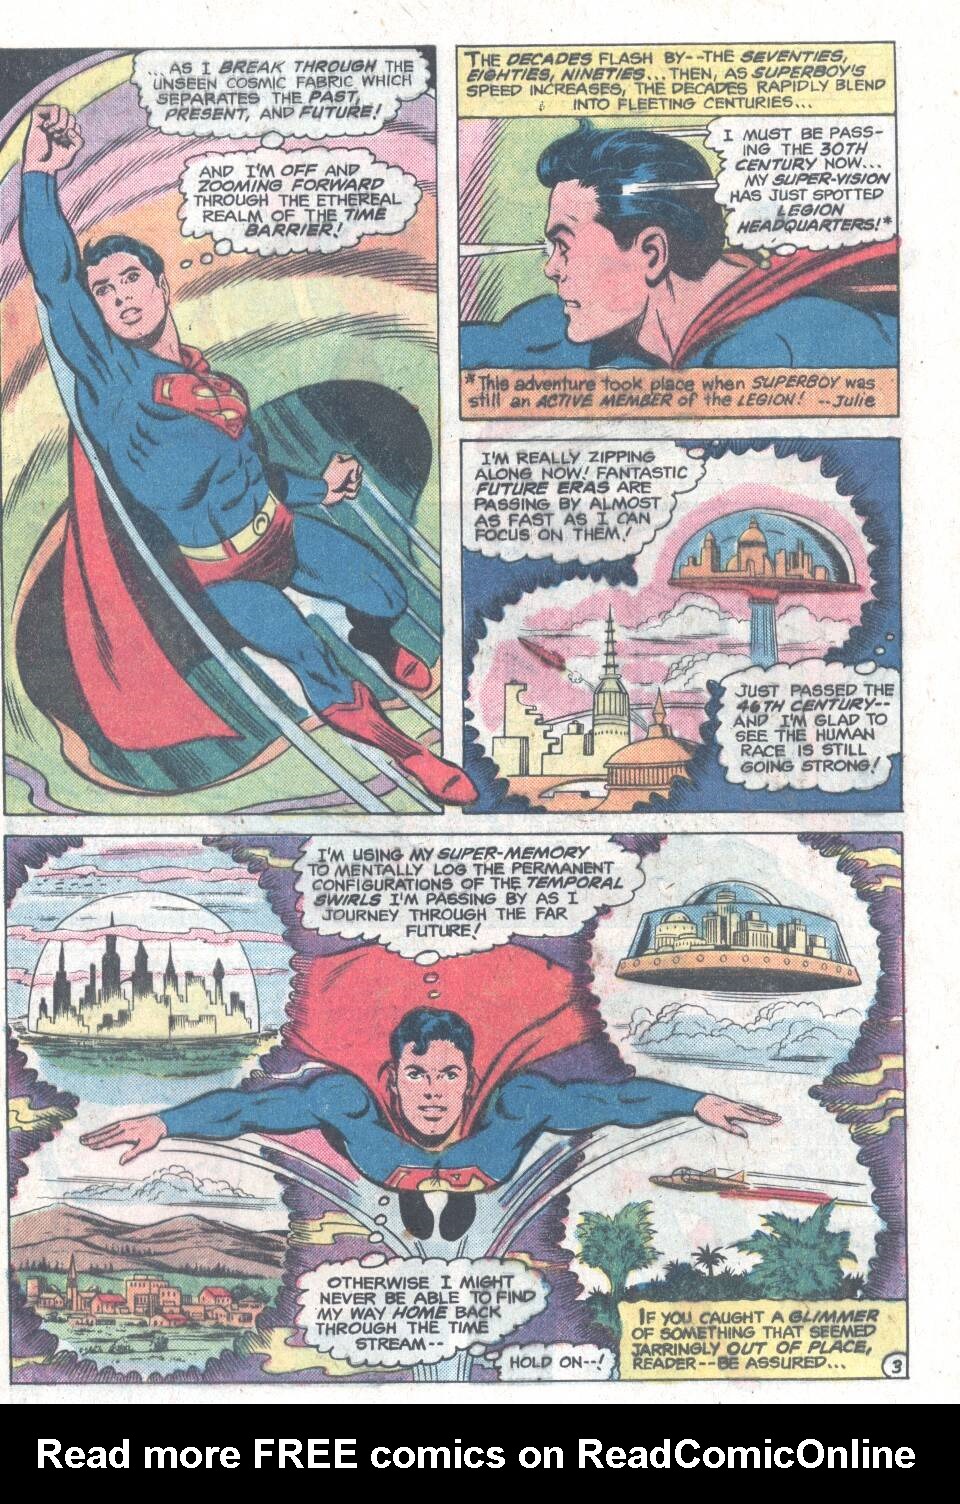 The New Adventures of Superboy 10 Page 3